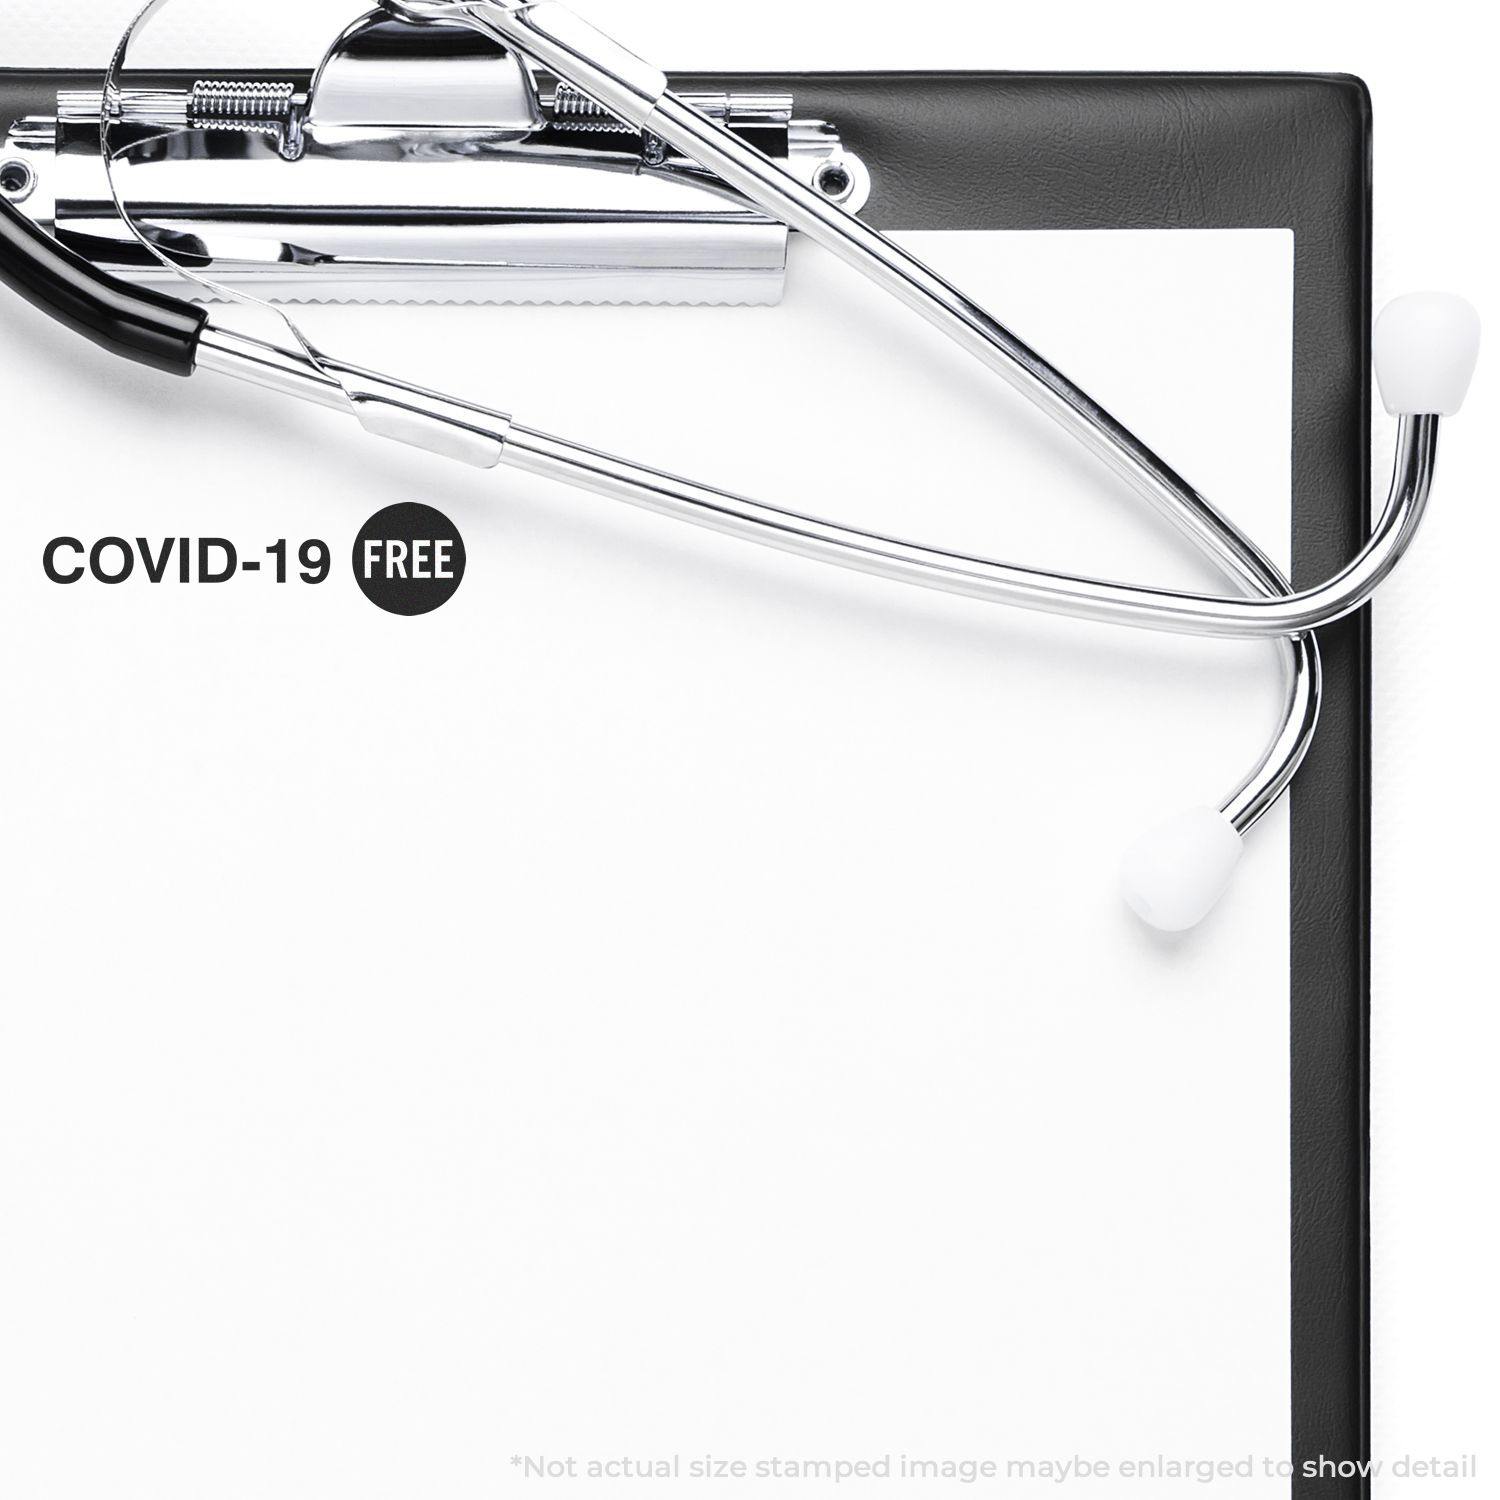 In Use Large Pre-Inked Covid-19 Stamp Image